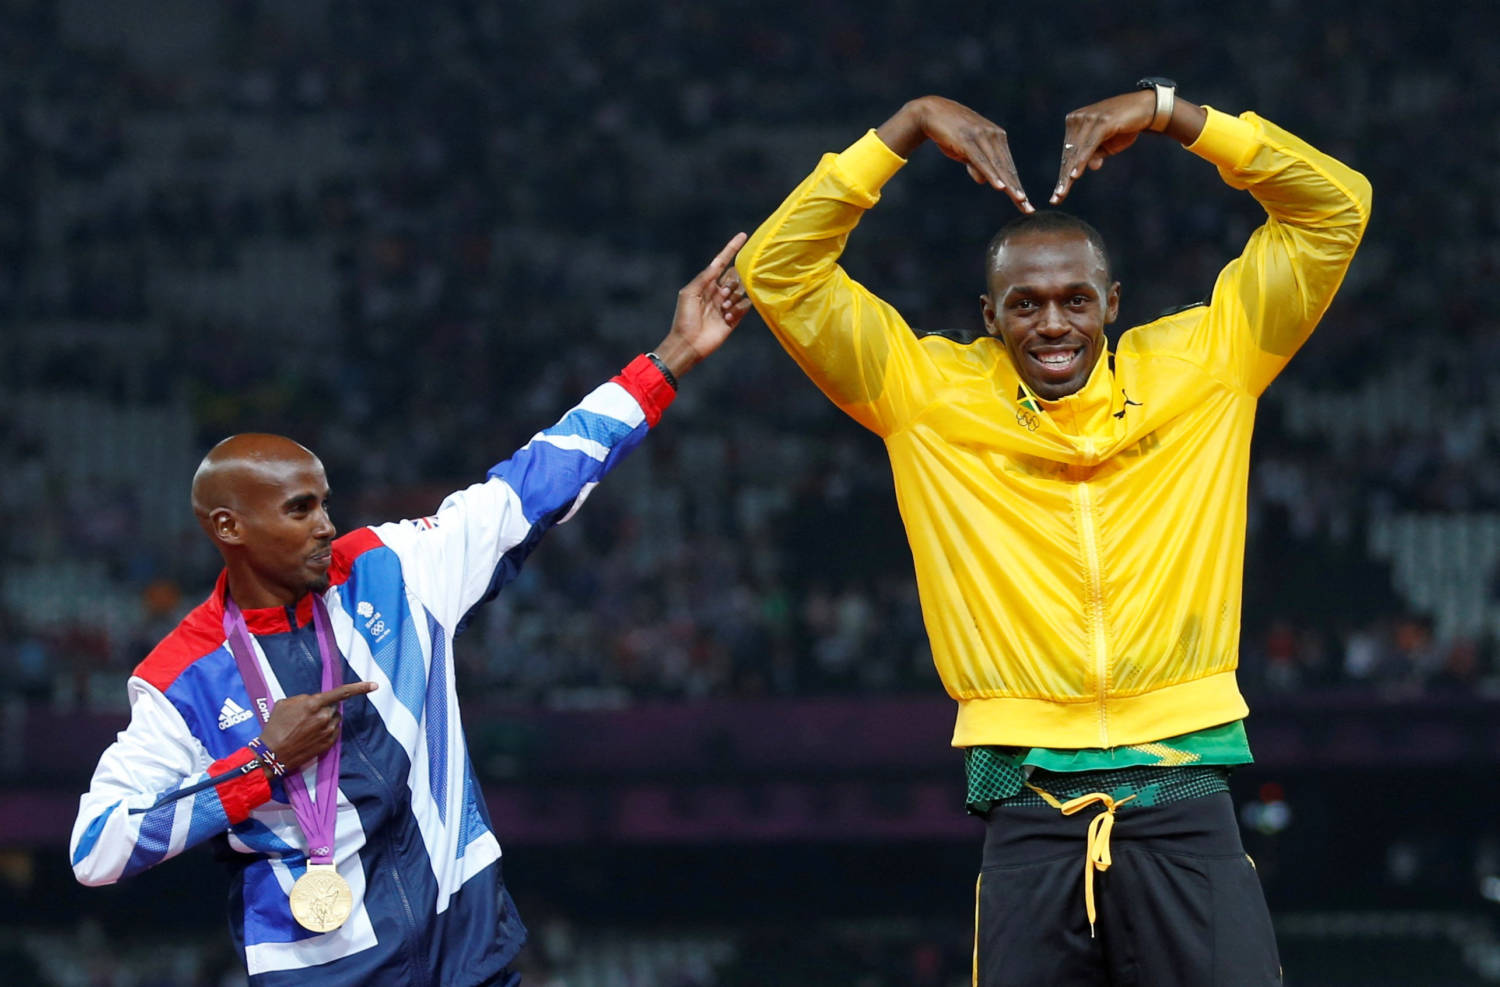 File Photo: Jamaica's Bolt Celebrates With Britain's Farah On The Podium After Each Receiving Gold Medals, Bolt For Men's 4x100m Relay And Farah For Men's 5000m At The Victory Ceremony At The London 2012 Olympic Games